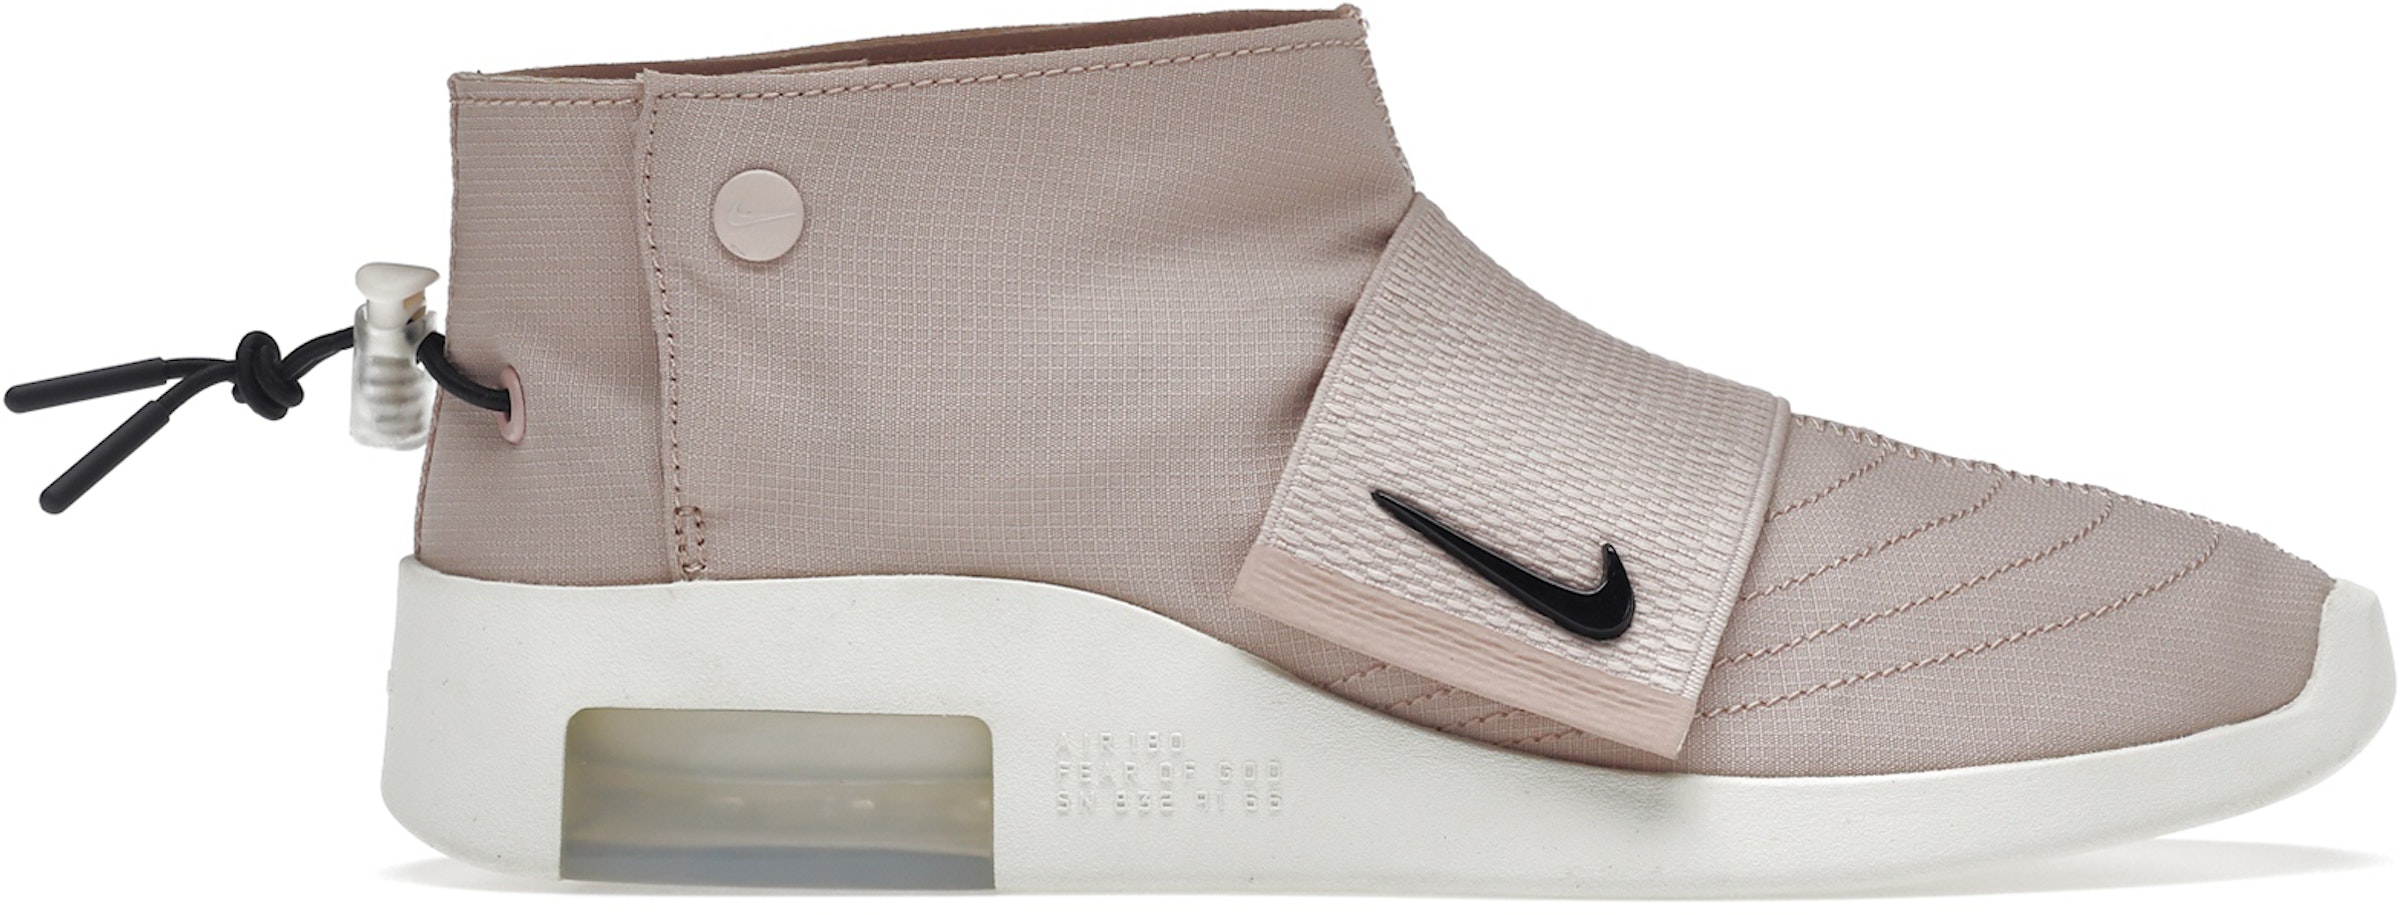 Nike Of Moccasin Particle Beige Men's - AT8086-200 - US